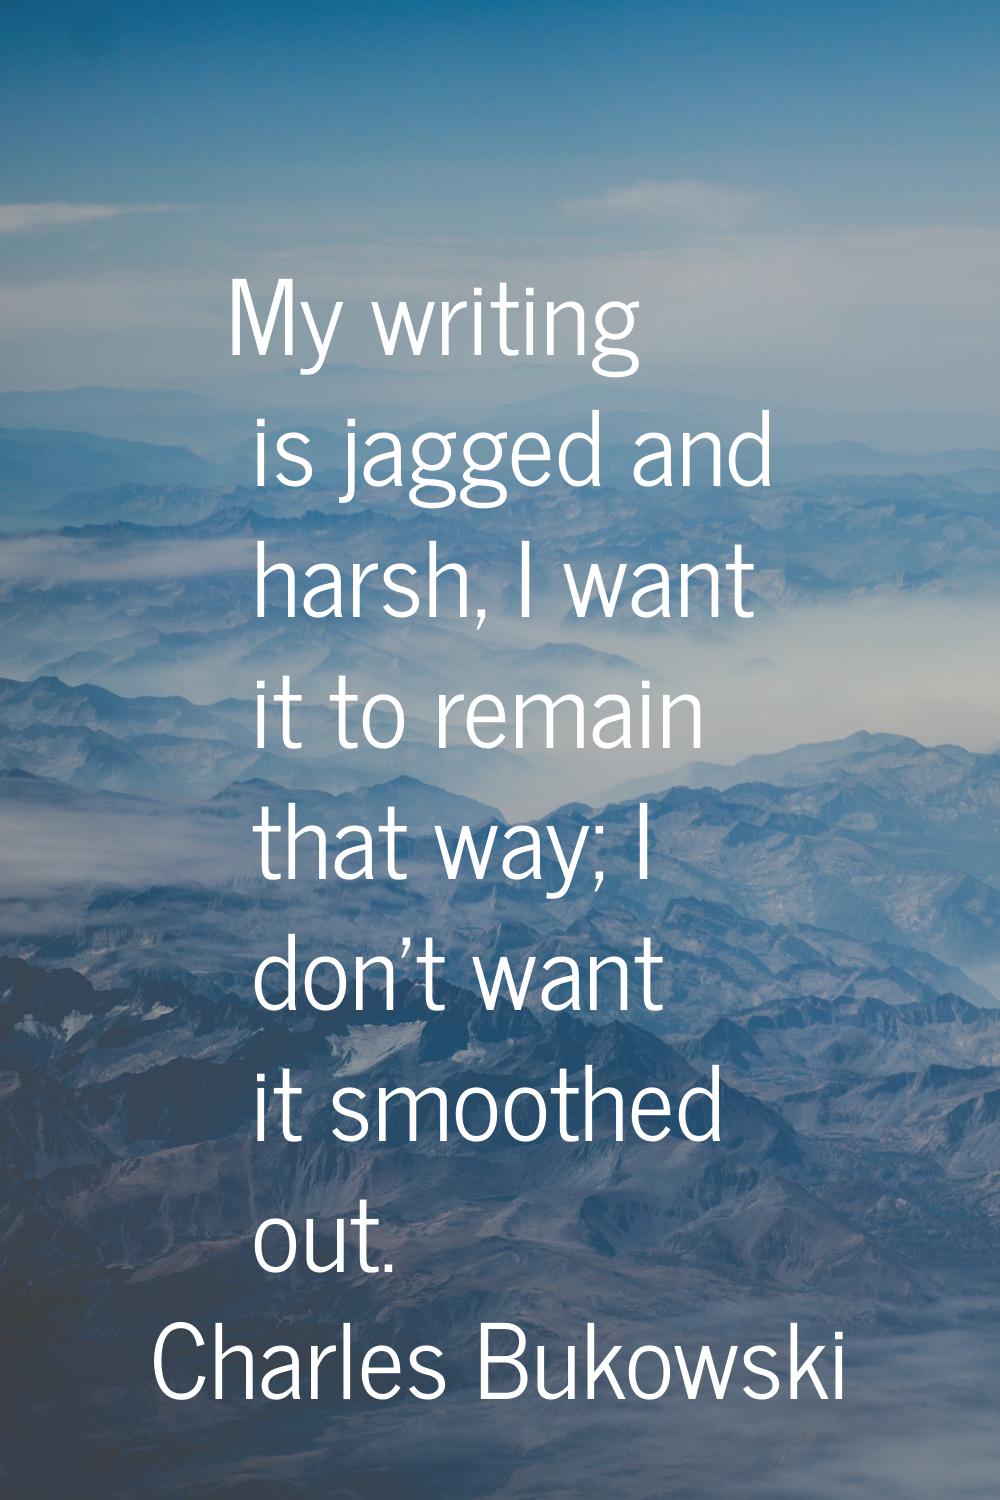 My writing is jagged and harsh, I want it to remain that way; I don't want it smoothed out.